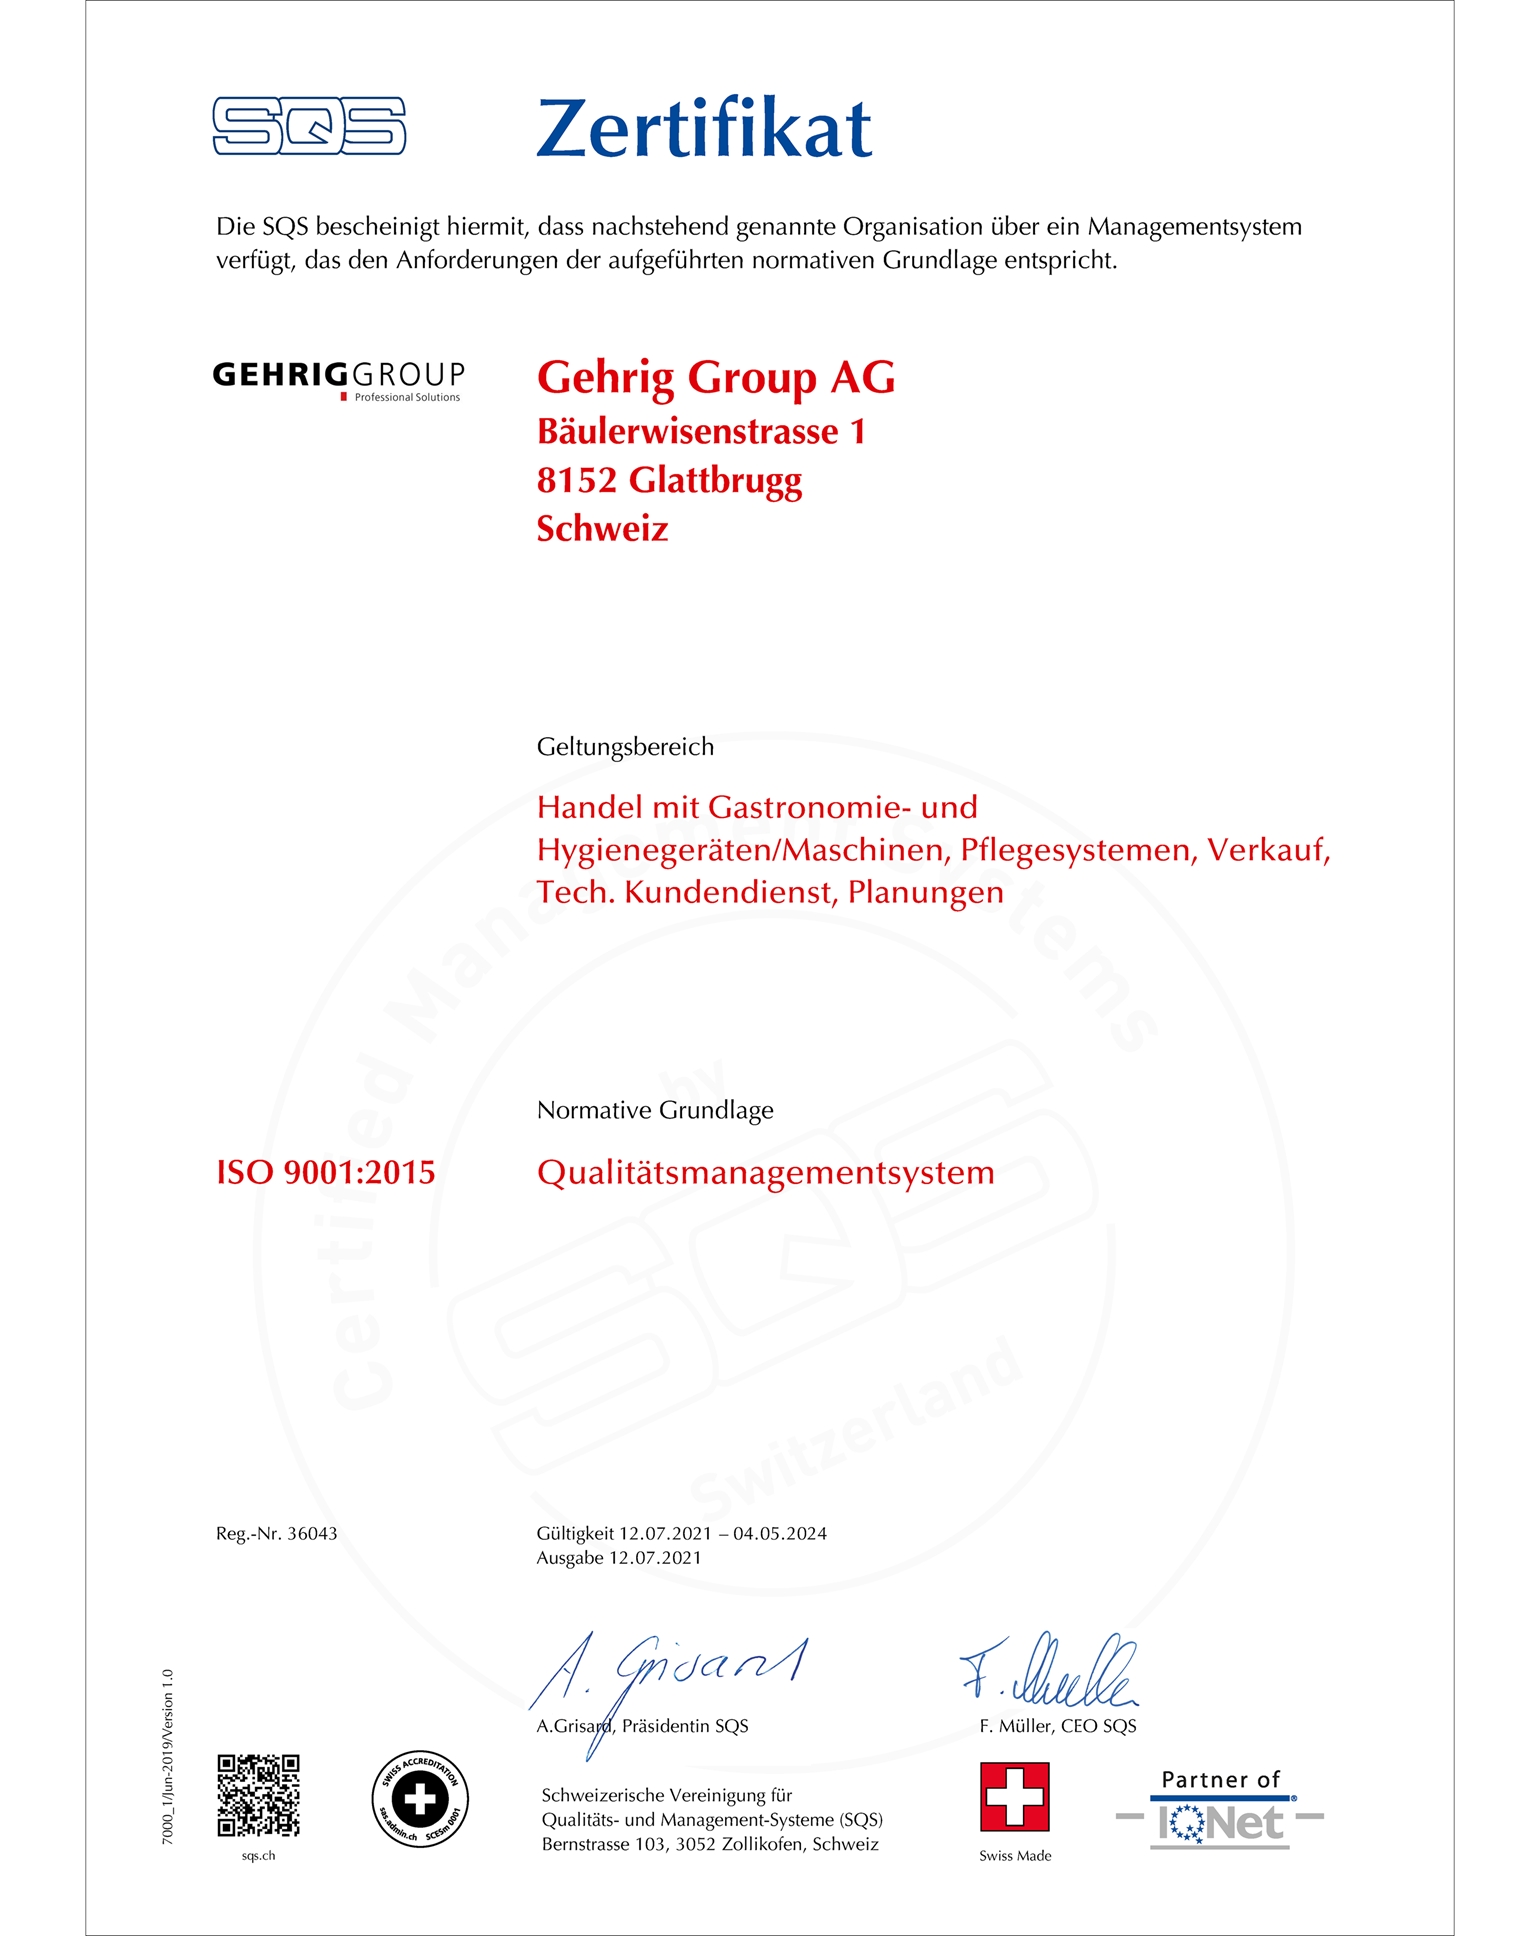 SQS Zertifikat ISO 9001 | Gehrig Group AG